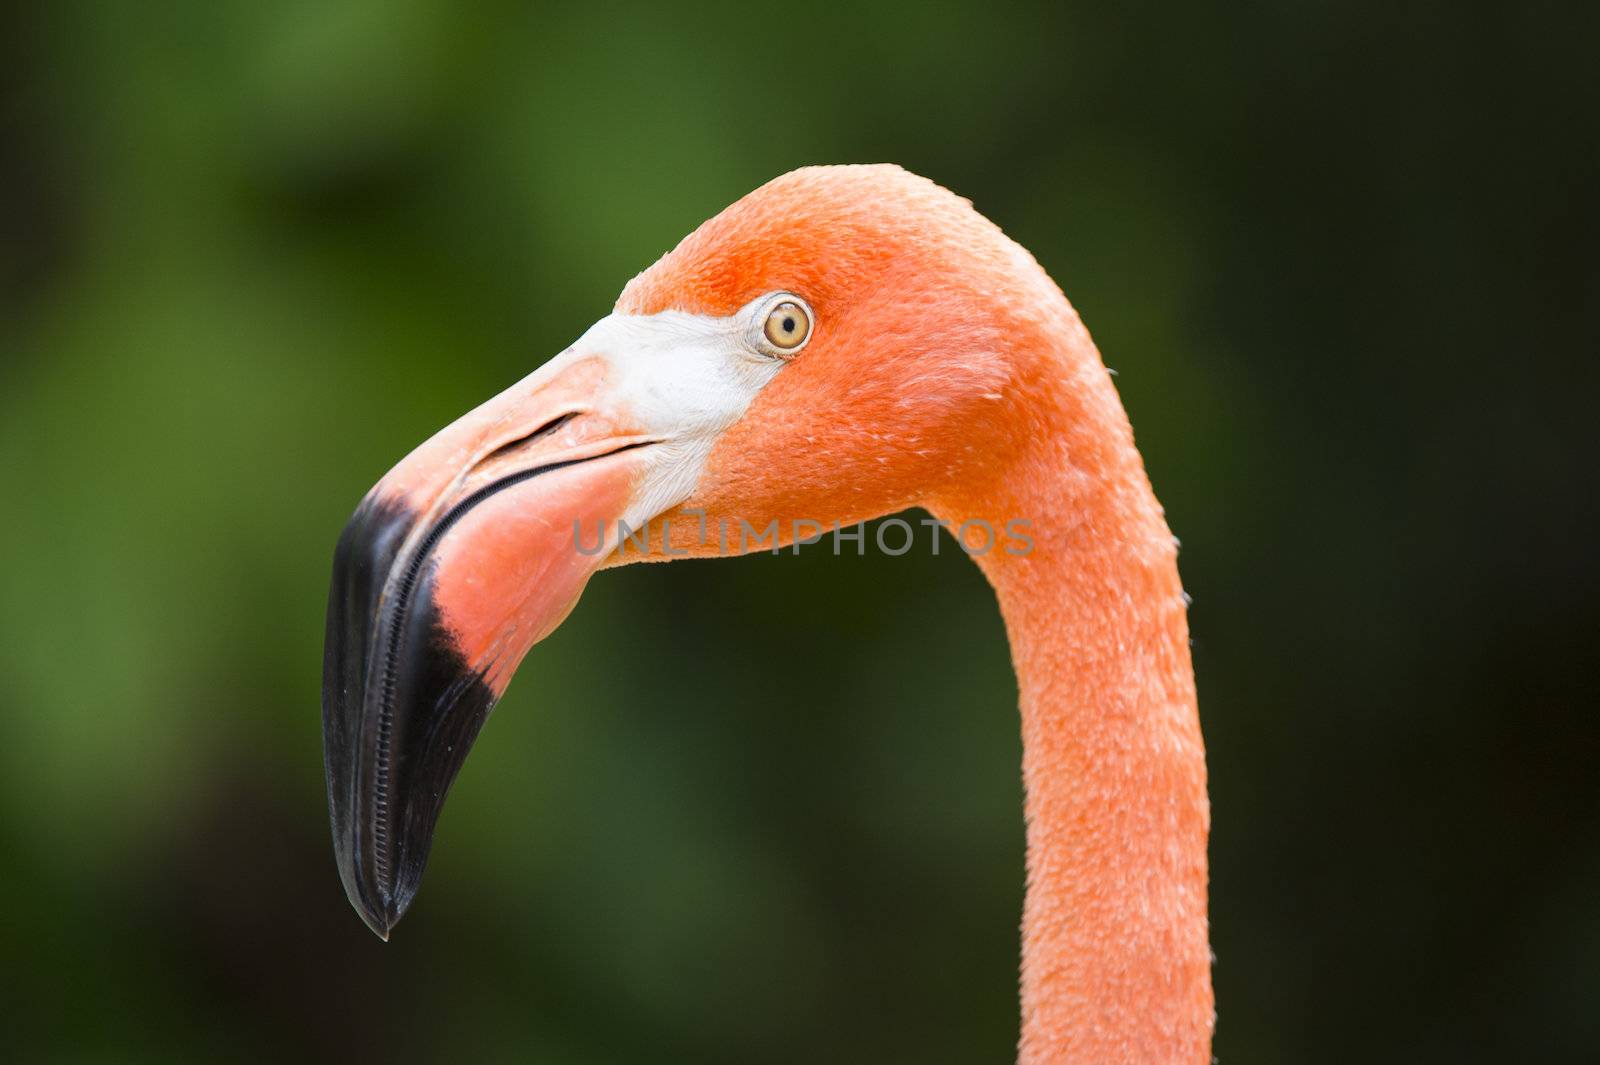 Close up image of head of Flamingo against blur background